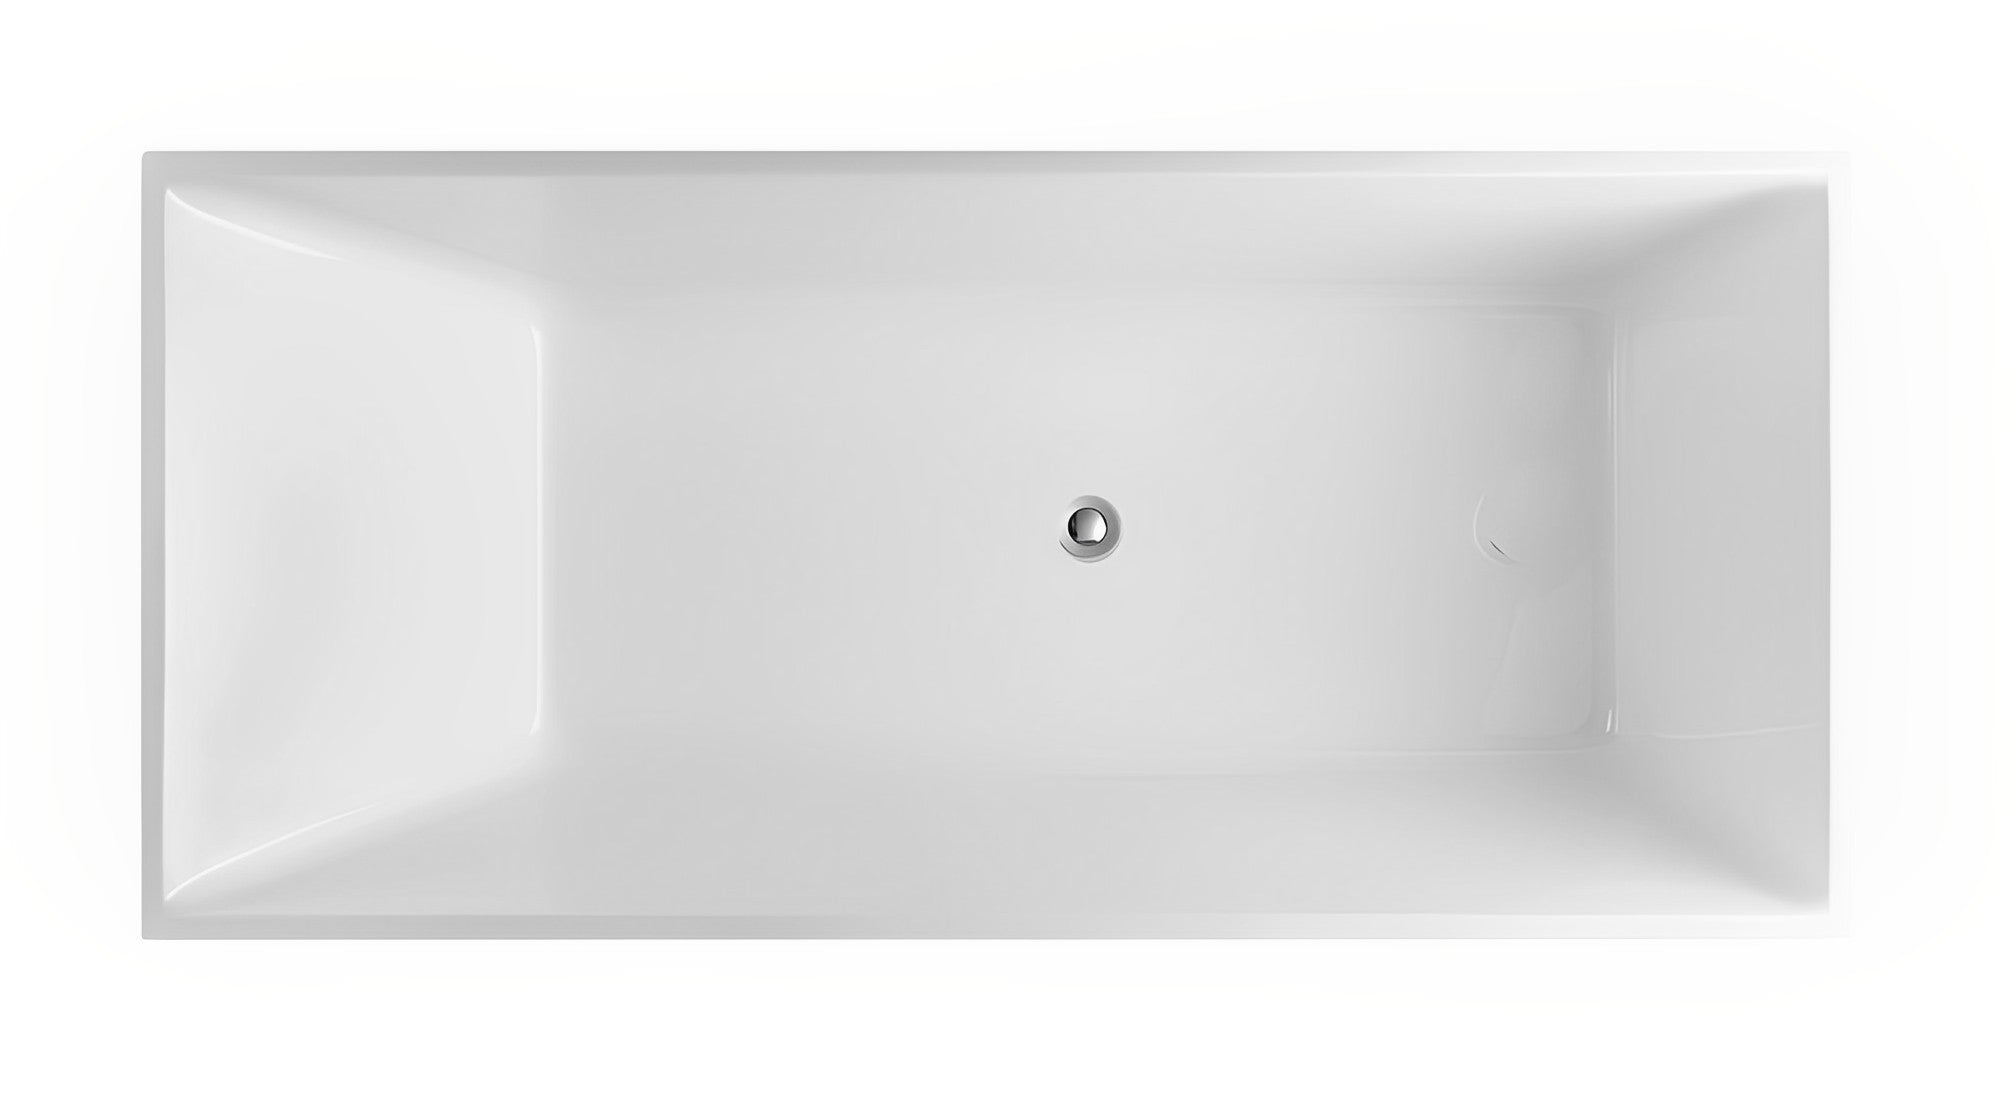 POSEIDON THEO BACK TO WALL BATH NON OVERFLOW GLOSS WHITE (AVAILABLE IN 1000MM, 1200MM, 1300MM, 1400MM, 1500MM AND 1700MM)